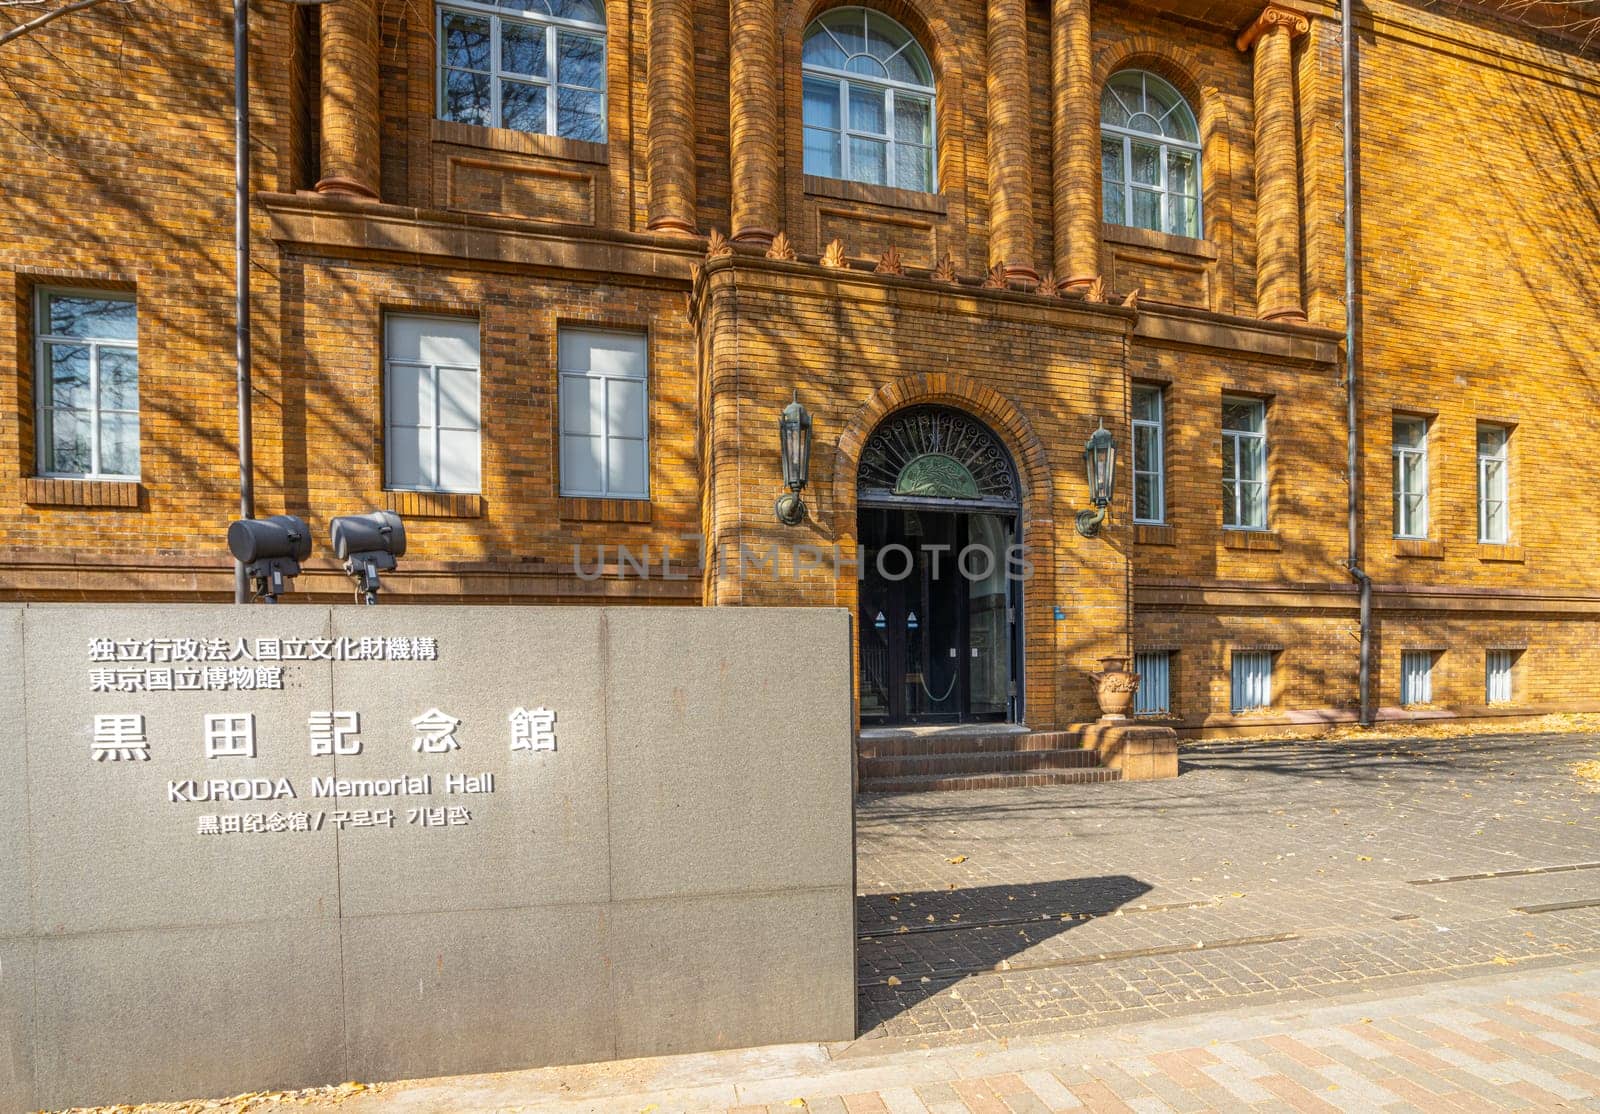 Tokyio, Japan. January 2024. the facade of the building housing the Koruda Memorial Hall in the city center. The building first opened as the home of the Artistic Research Institute for the Imperial Academy of Fine Arts in 1930.